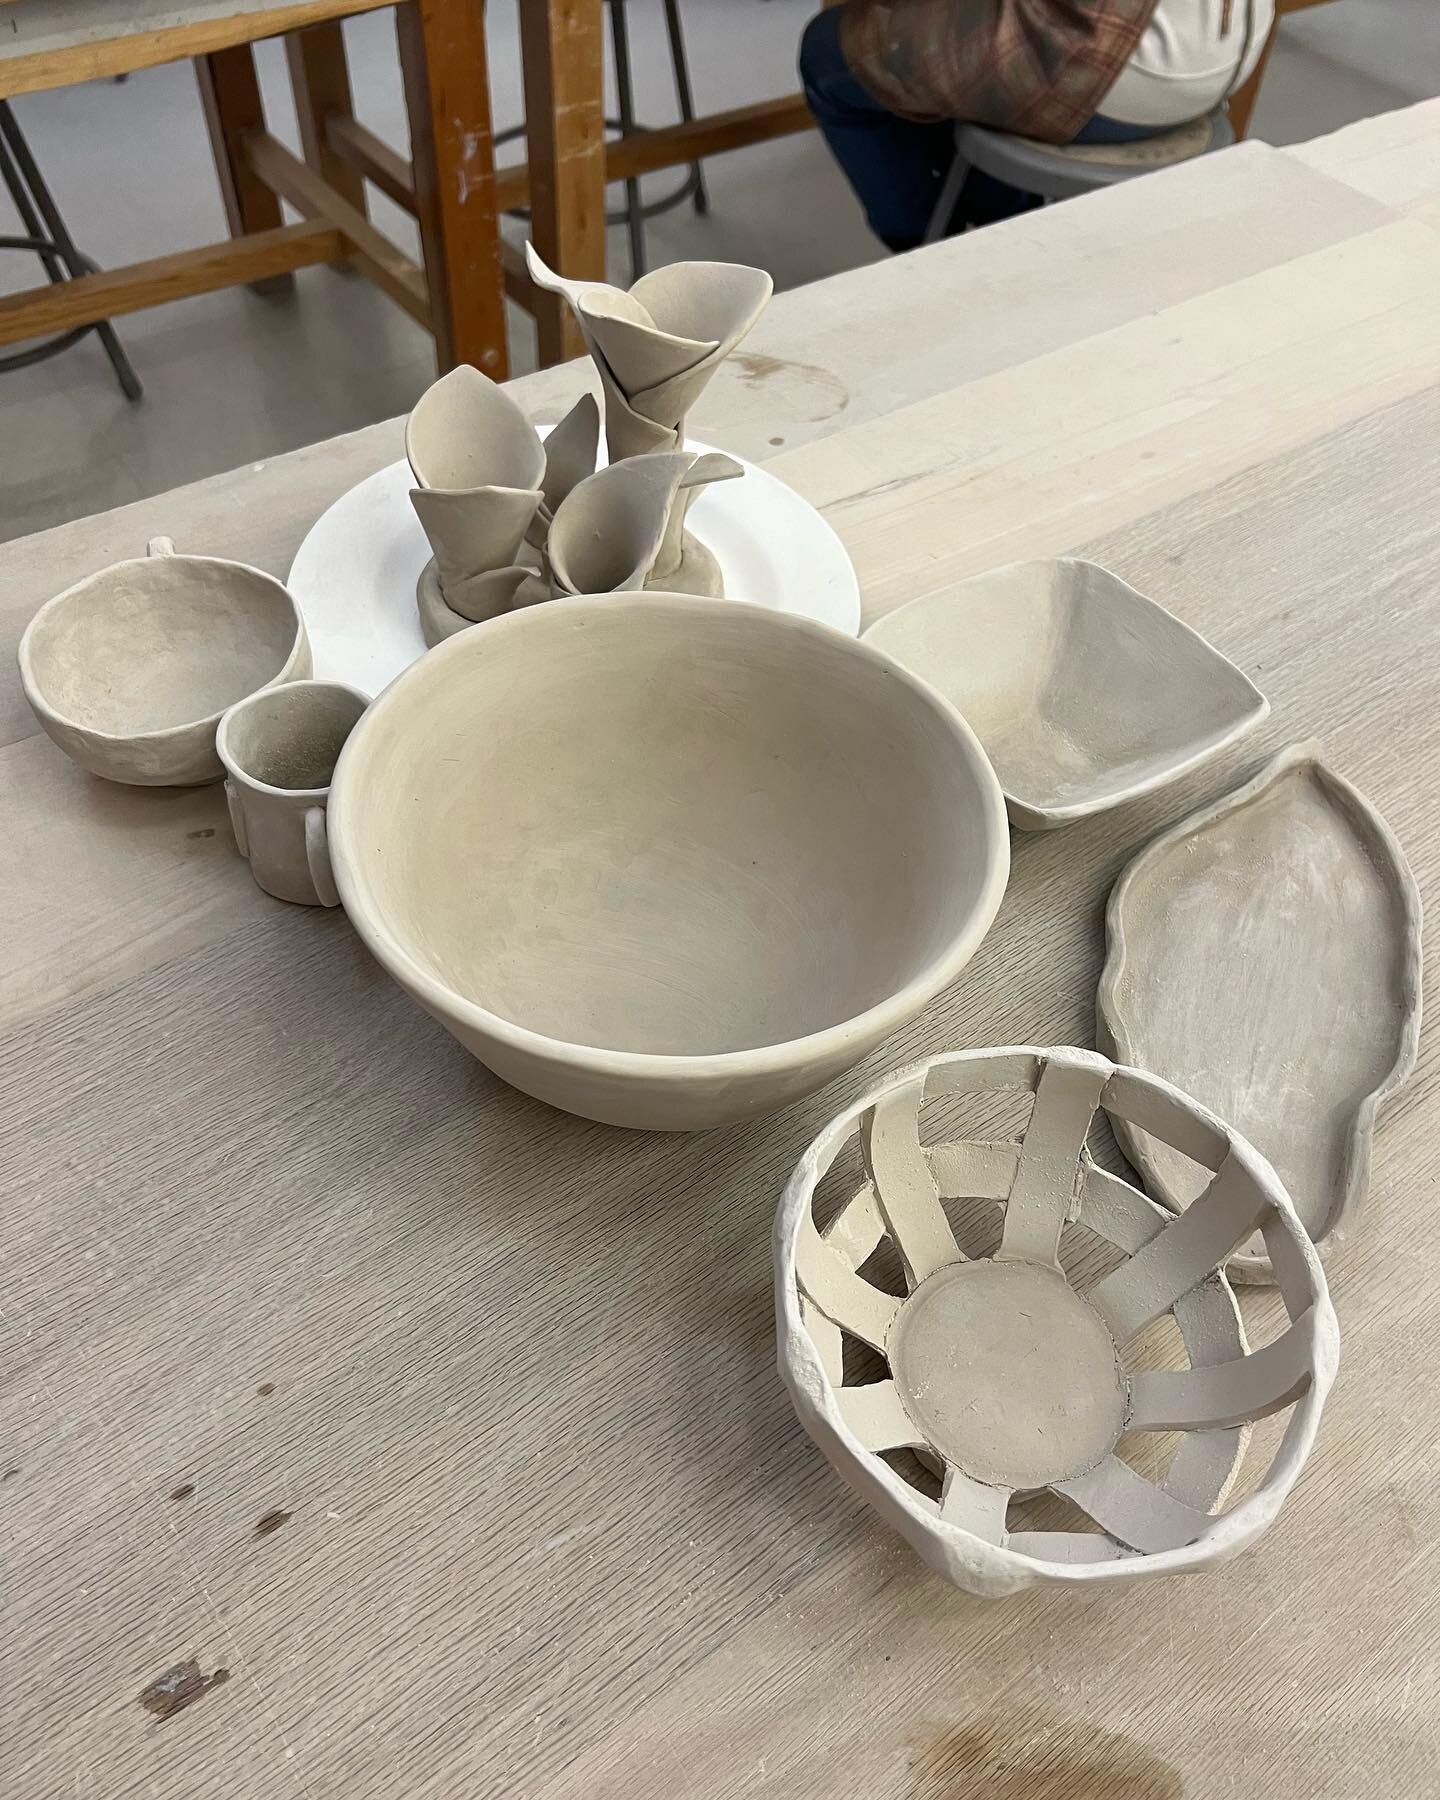 Beautiful work by the Wednesday evening hand building introductory class. Thank you @a.leceramics for supporting great experiences and great outcomes 🌸❤️
#tribecaclayworks #manhattanyouth #clay #ceramics #tribeca #sculpture #ceramicart #ceramiclove 